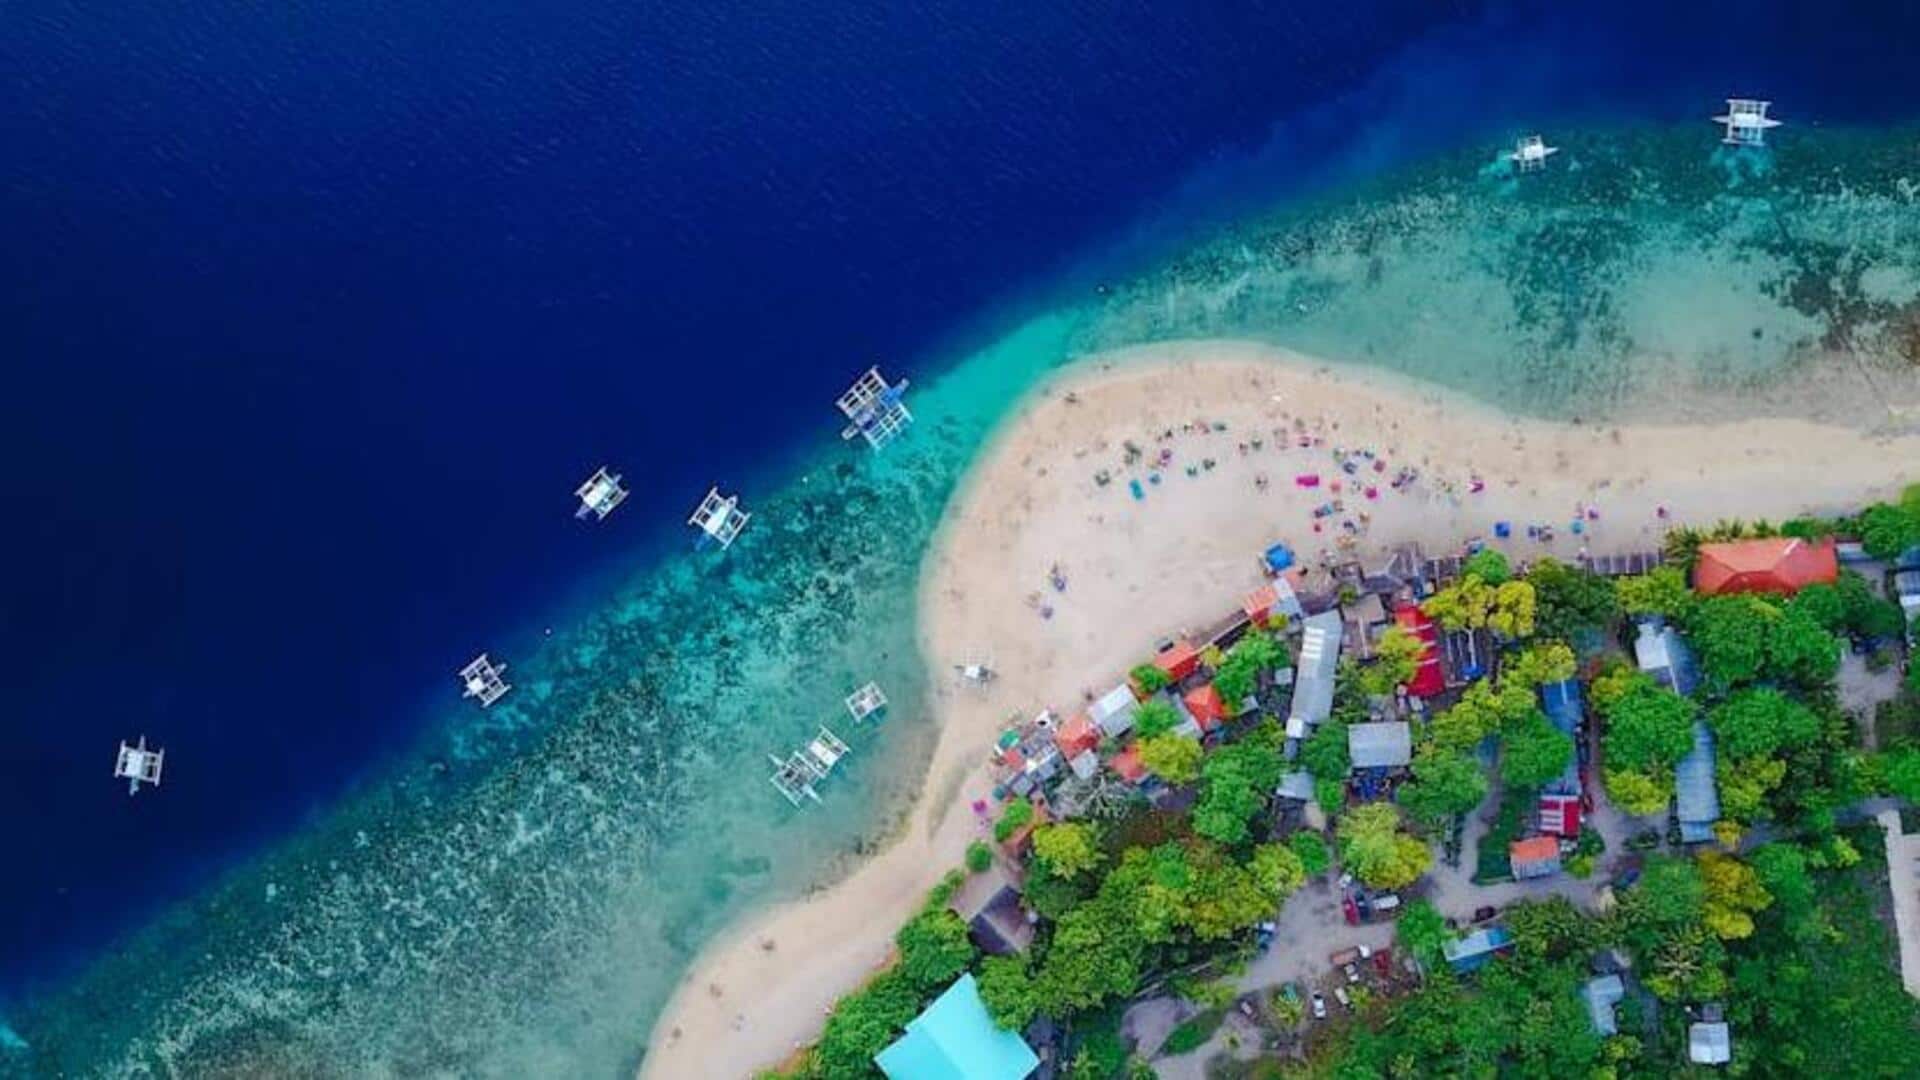 Go for an island-hopping adventure to Palawan in the Philippines